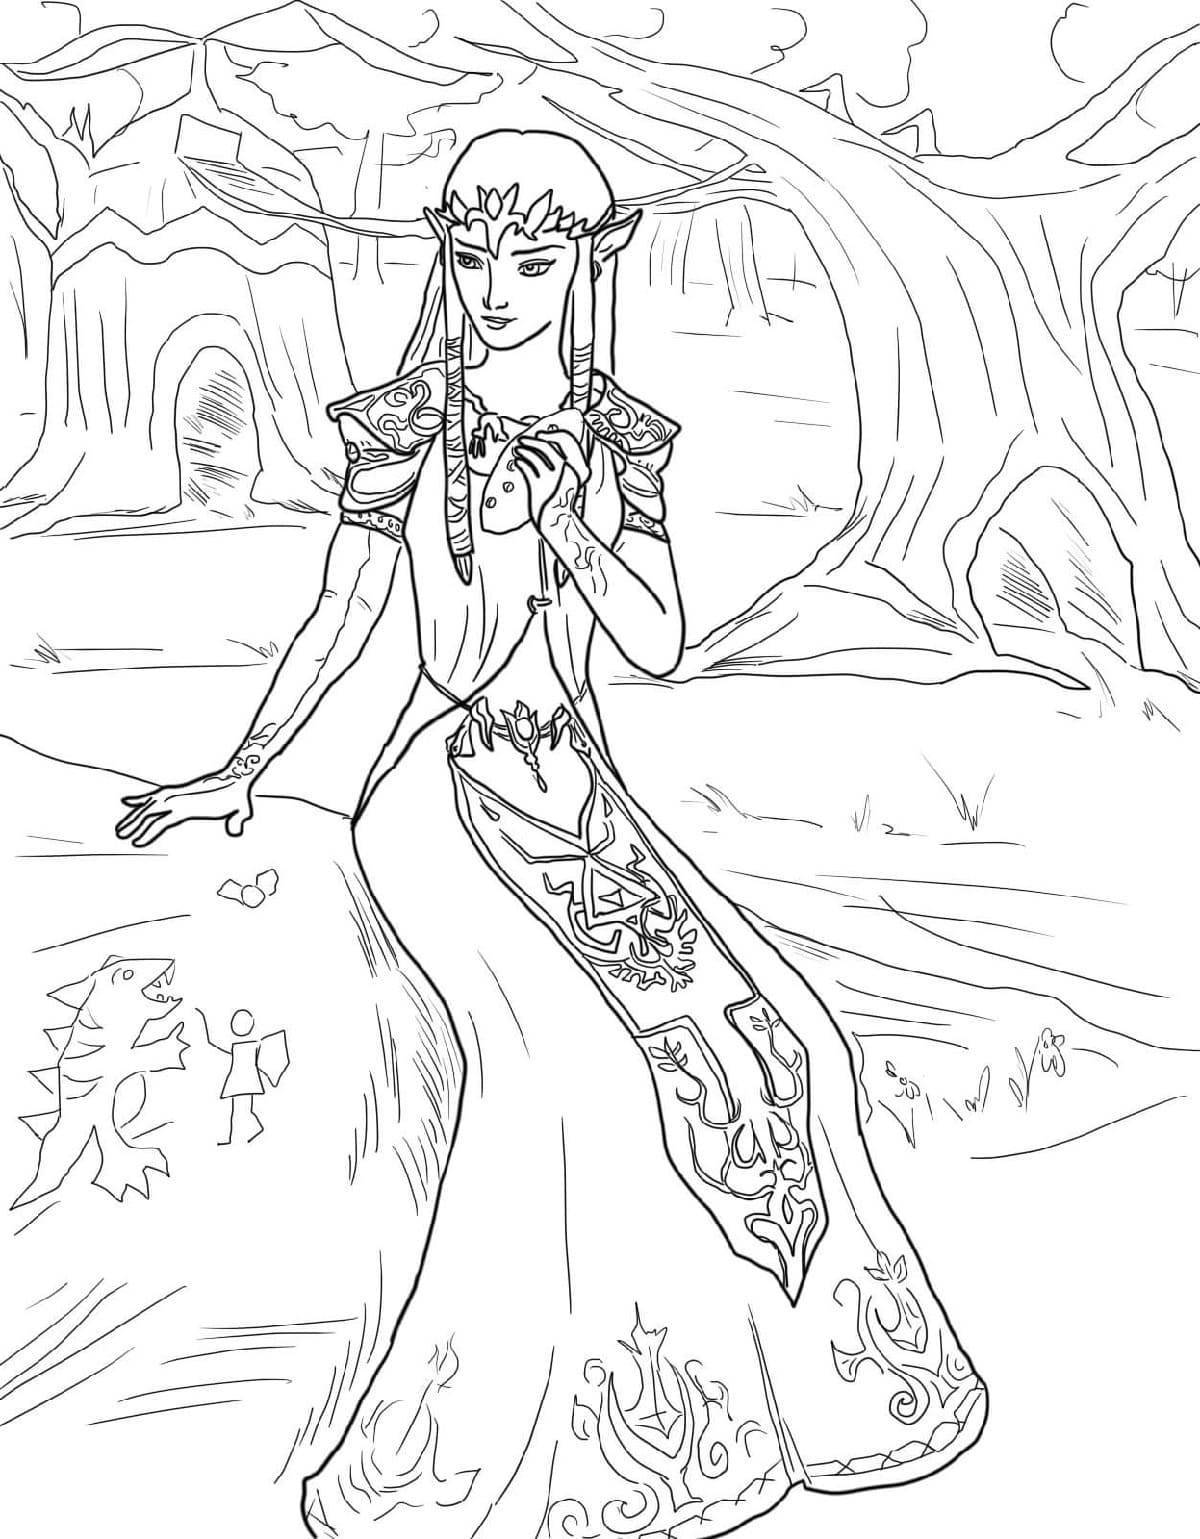 Coloring page magnanimous mistress of the copper mountain